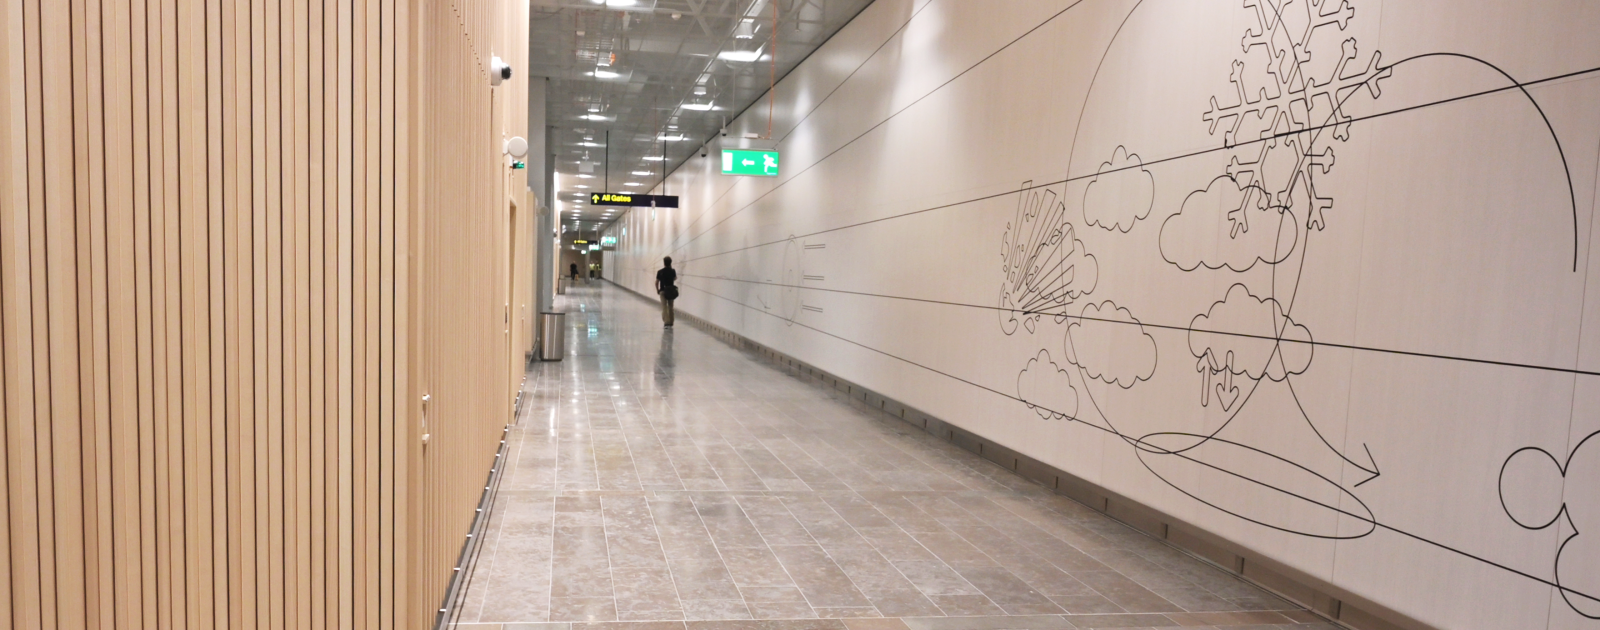 A traveller walking down the art corridor behind the new security check in Terminal 5.